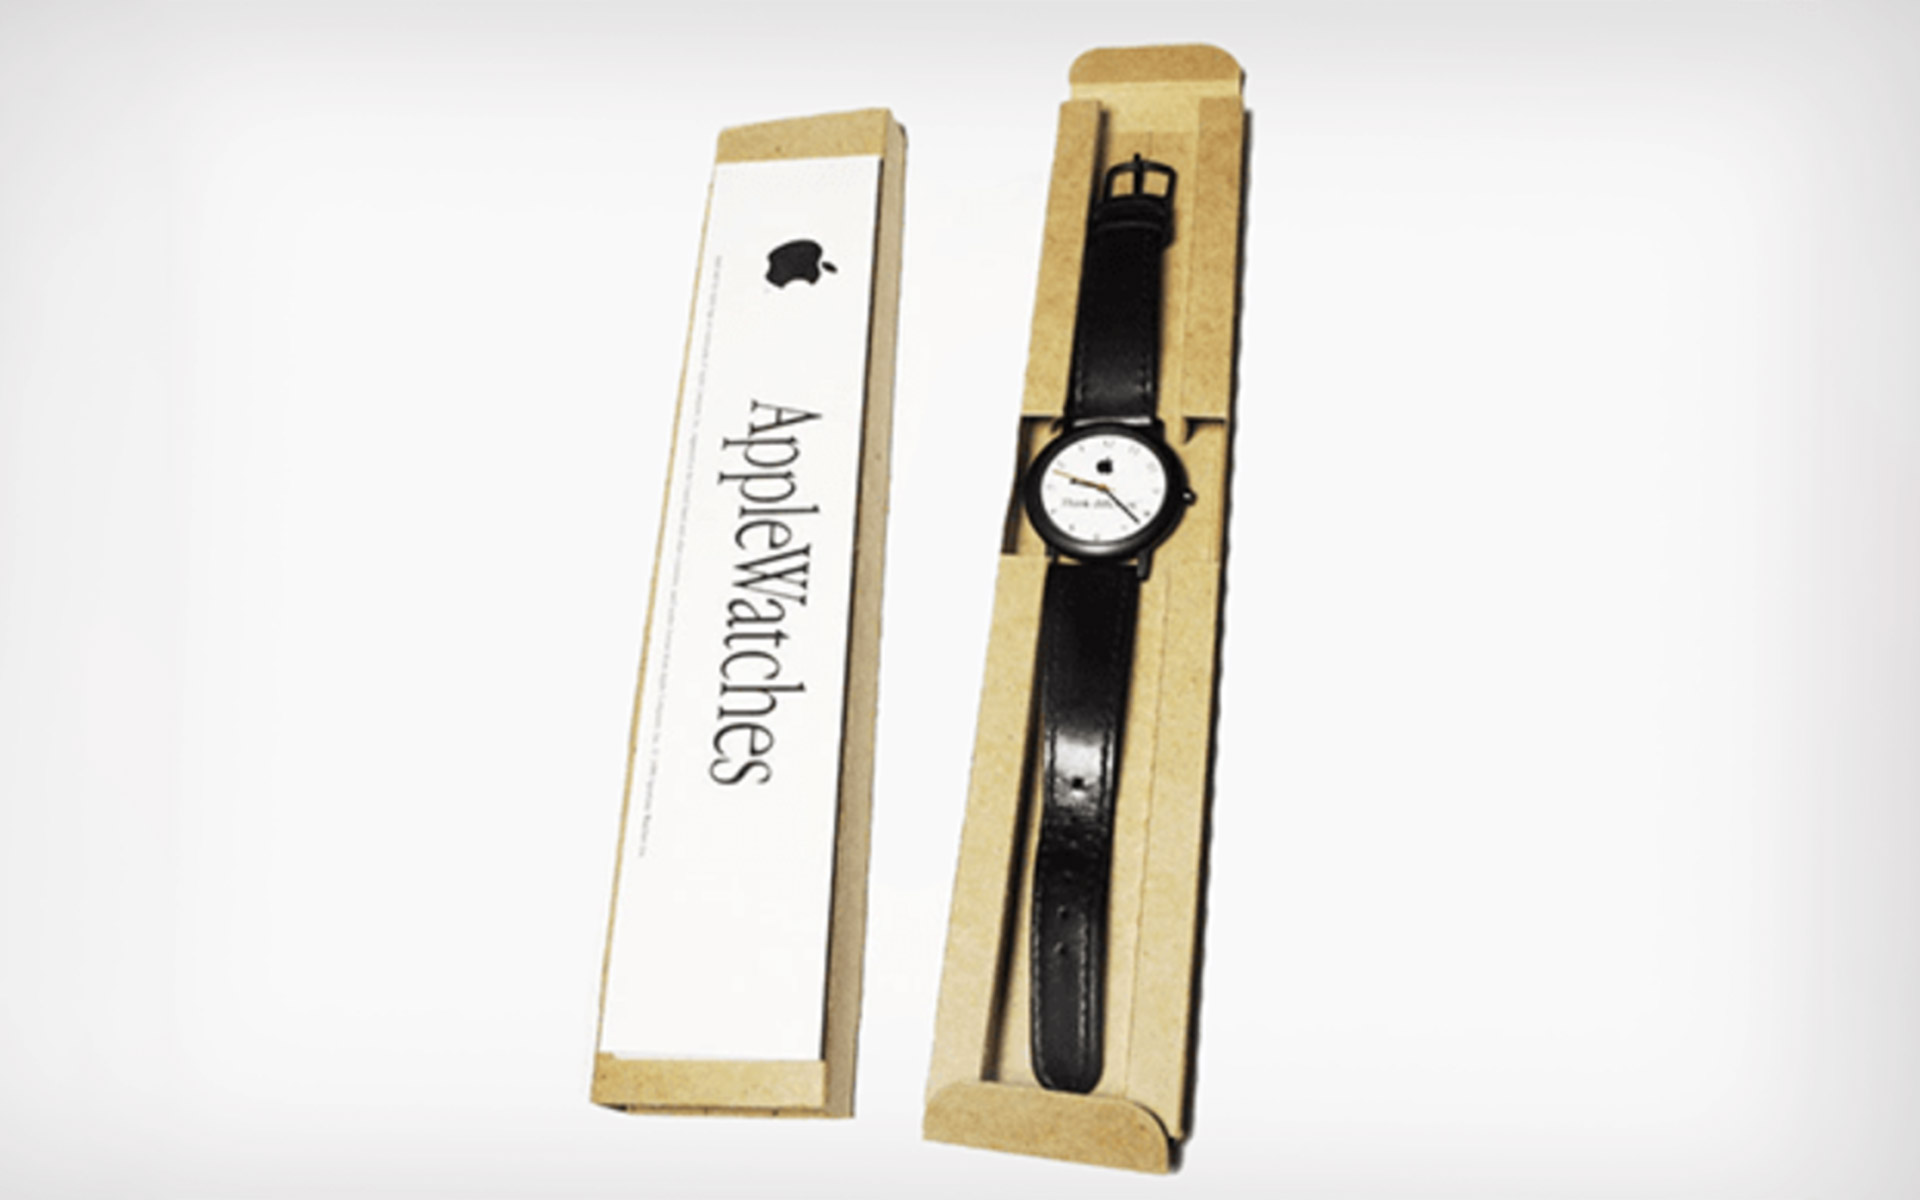 Old Apple Watch Inside the Box